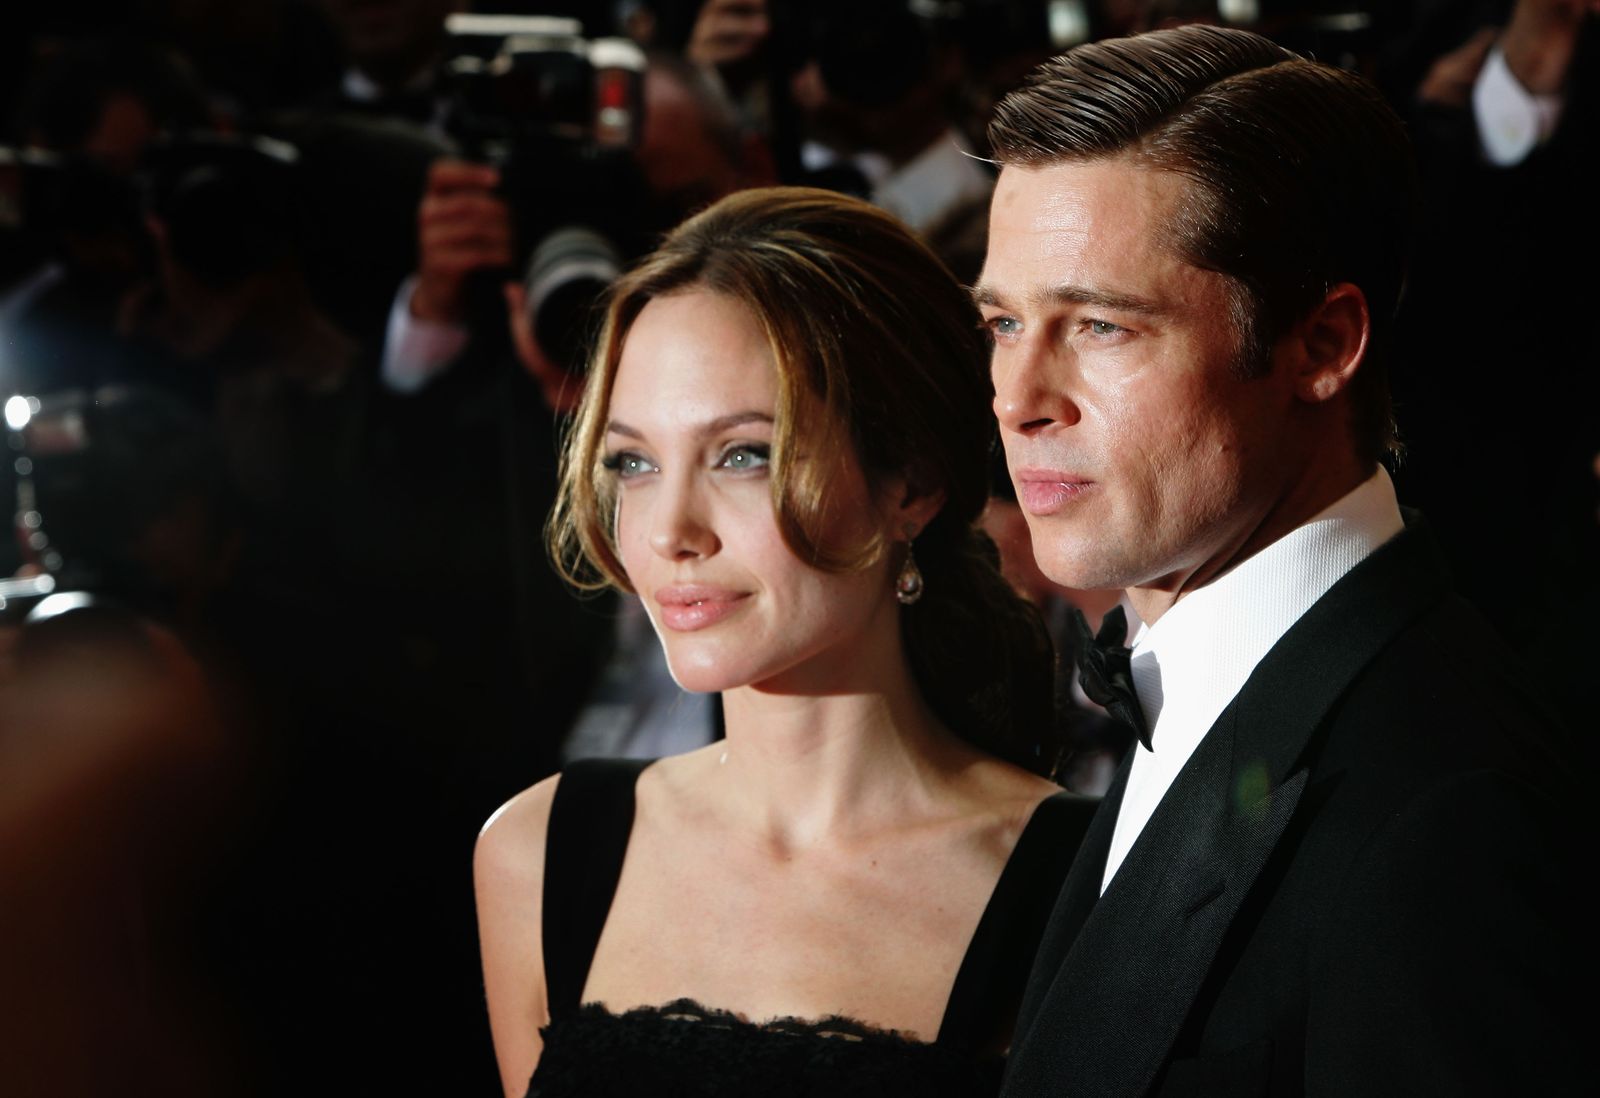 Brad Pitt and Angelina Jolie at the premiere of "A Mighty Heart" during the 60th International Cannes Film Festival on May 21, 2007. | Photo: Getty Images